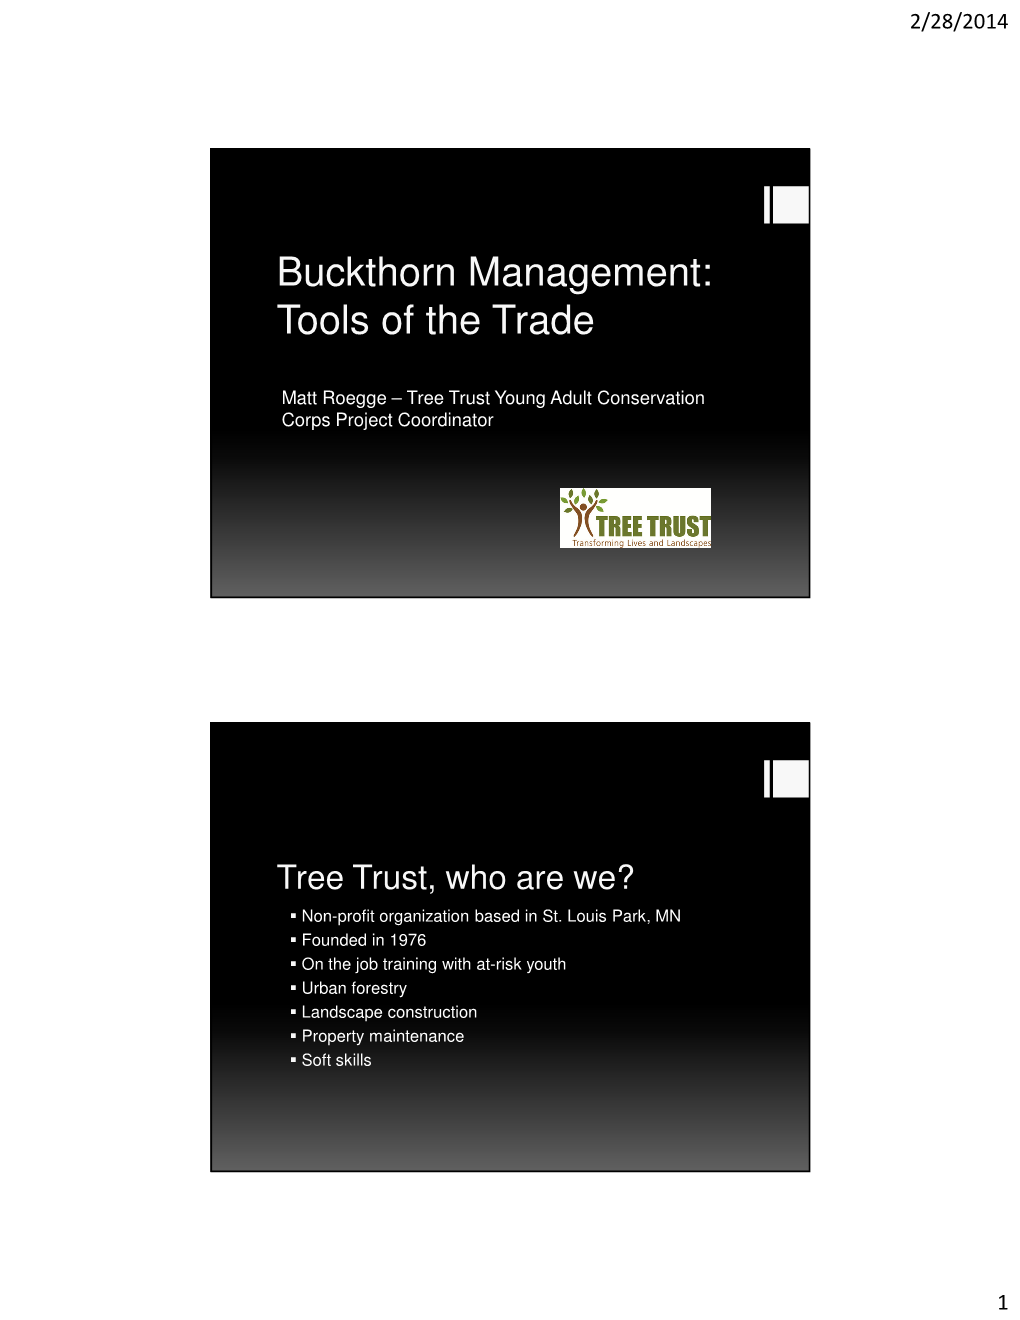 Buckthorn Management: Tools of the Trade